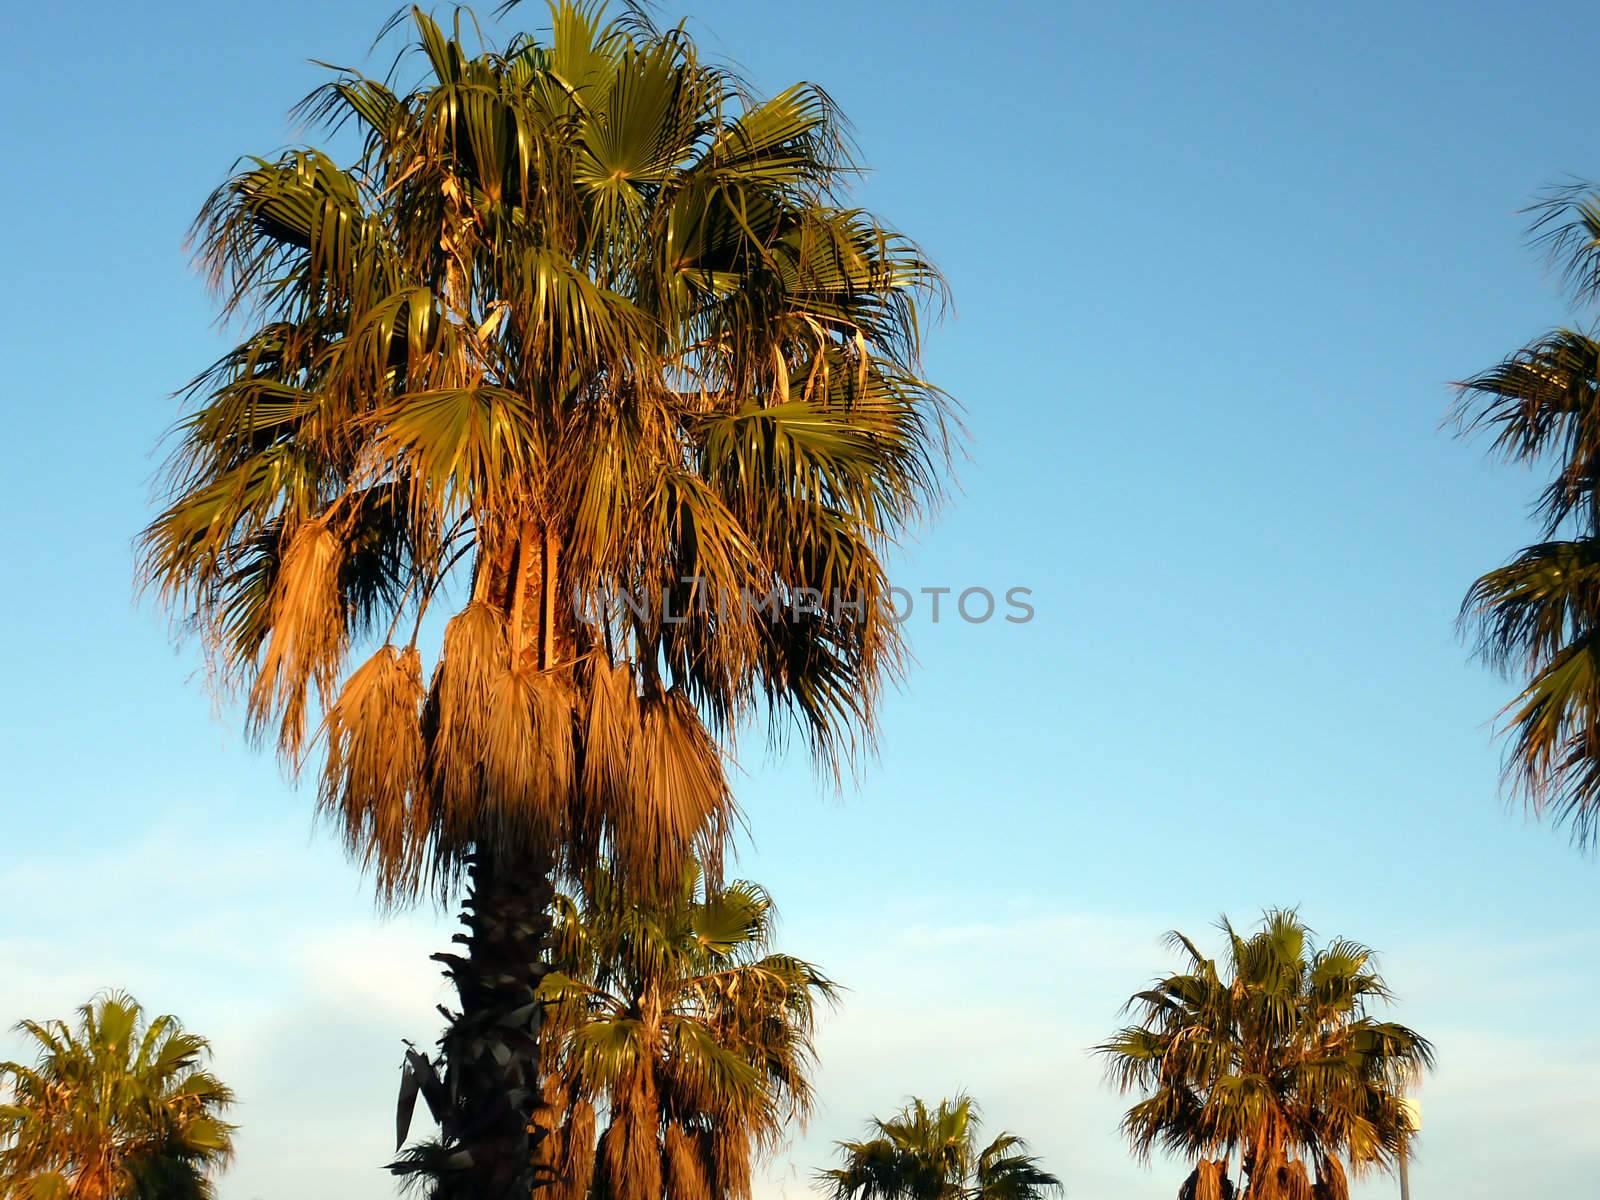 Many palm trees by sunset and beautiful weather